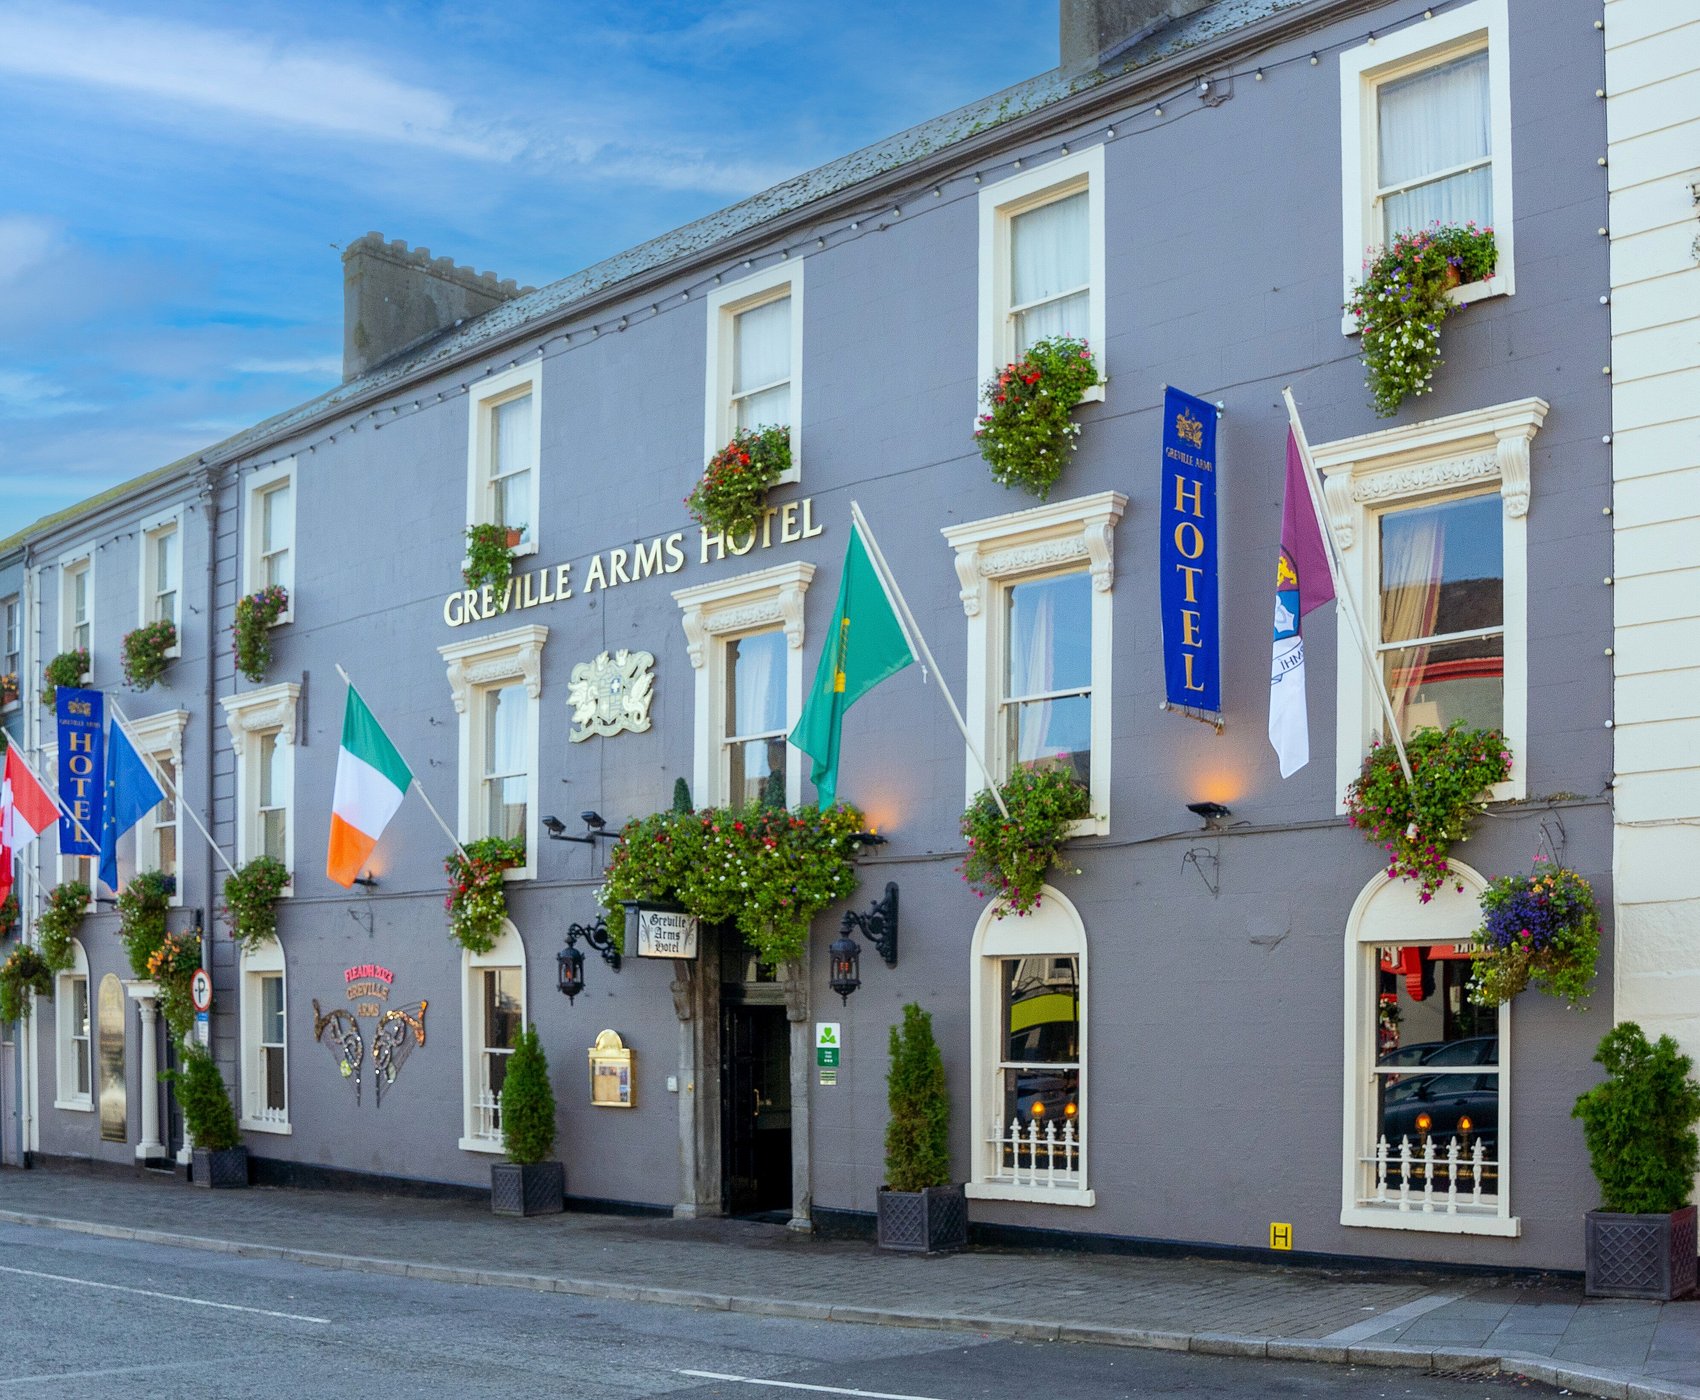 Greville Arms Hotel image